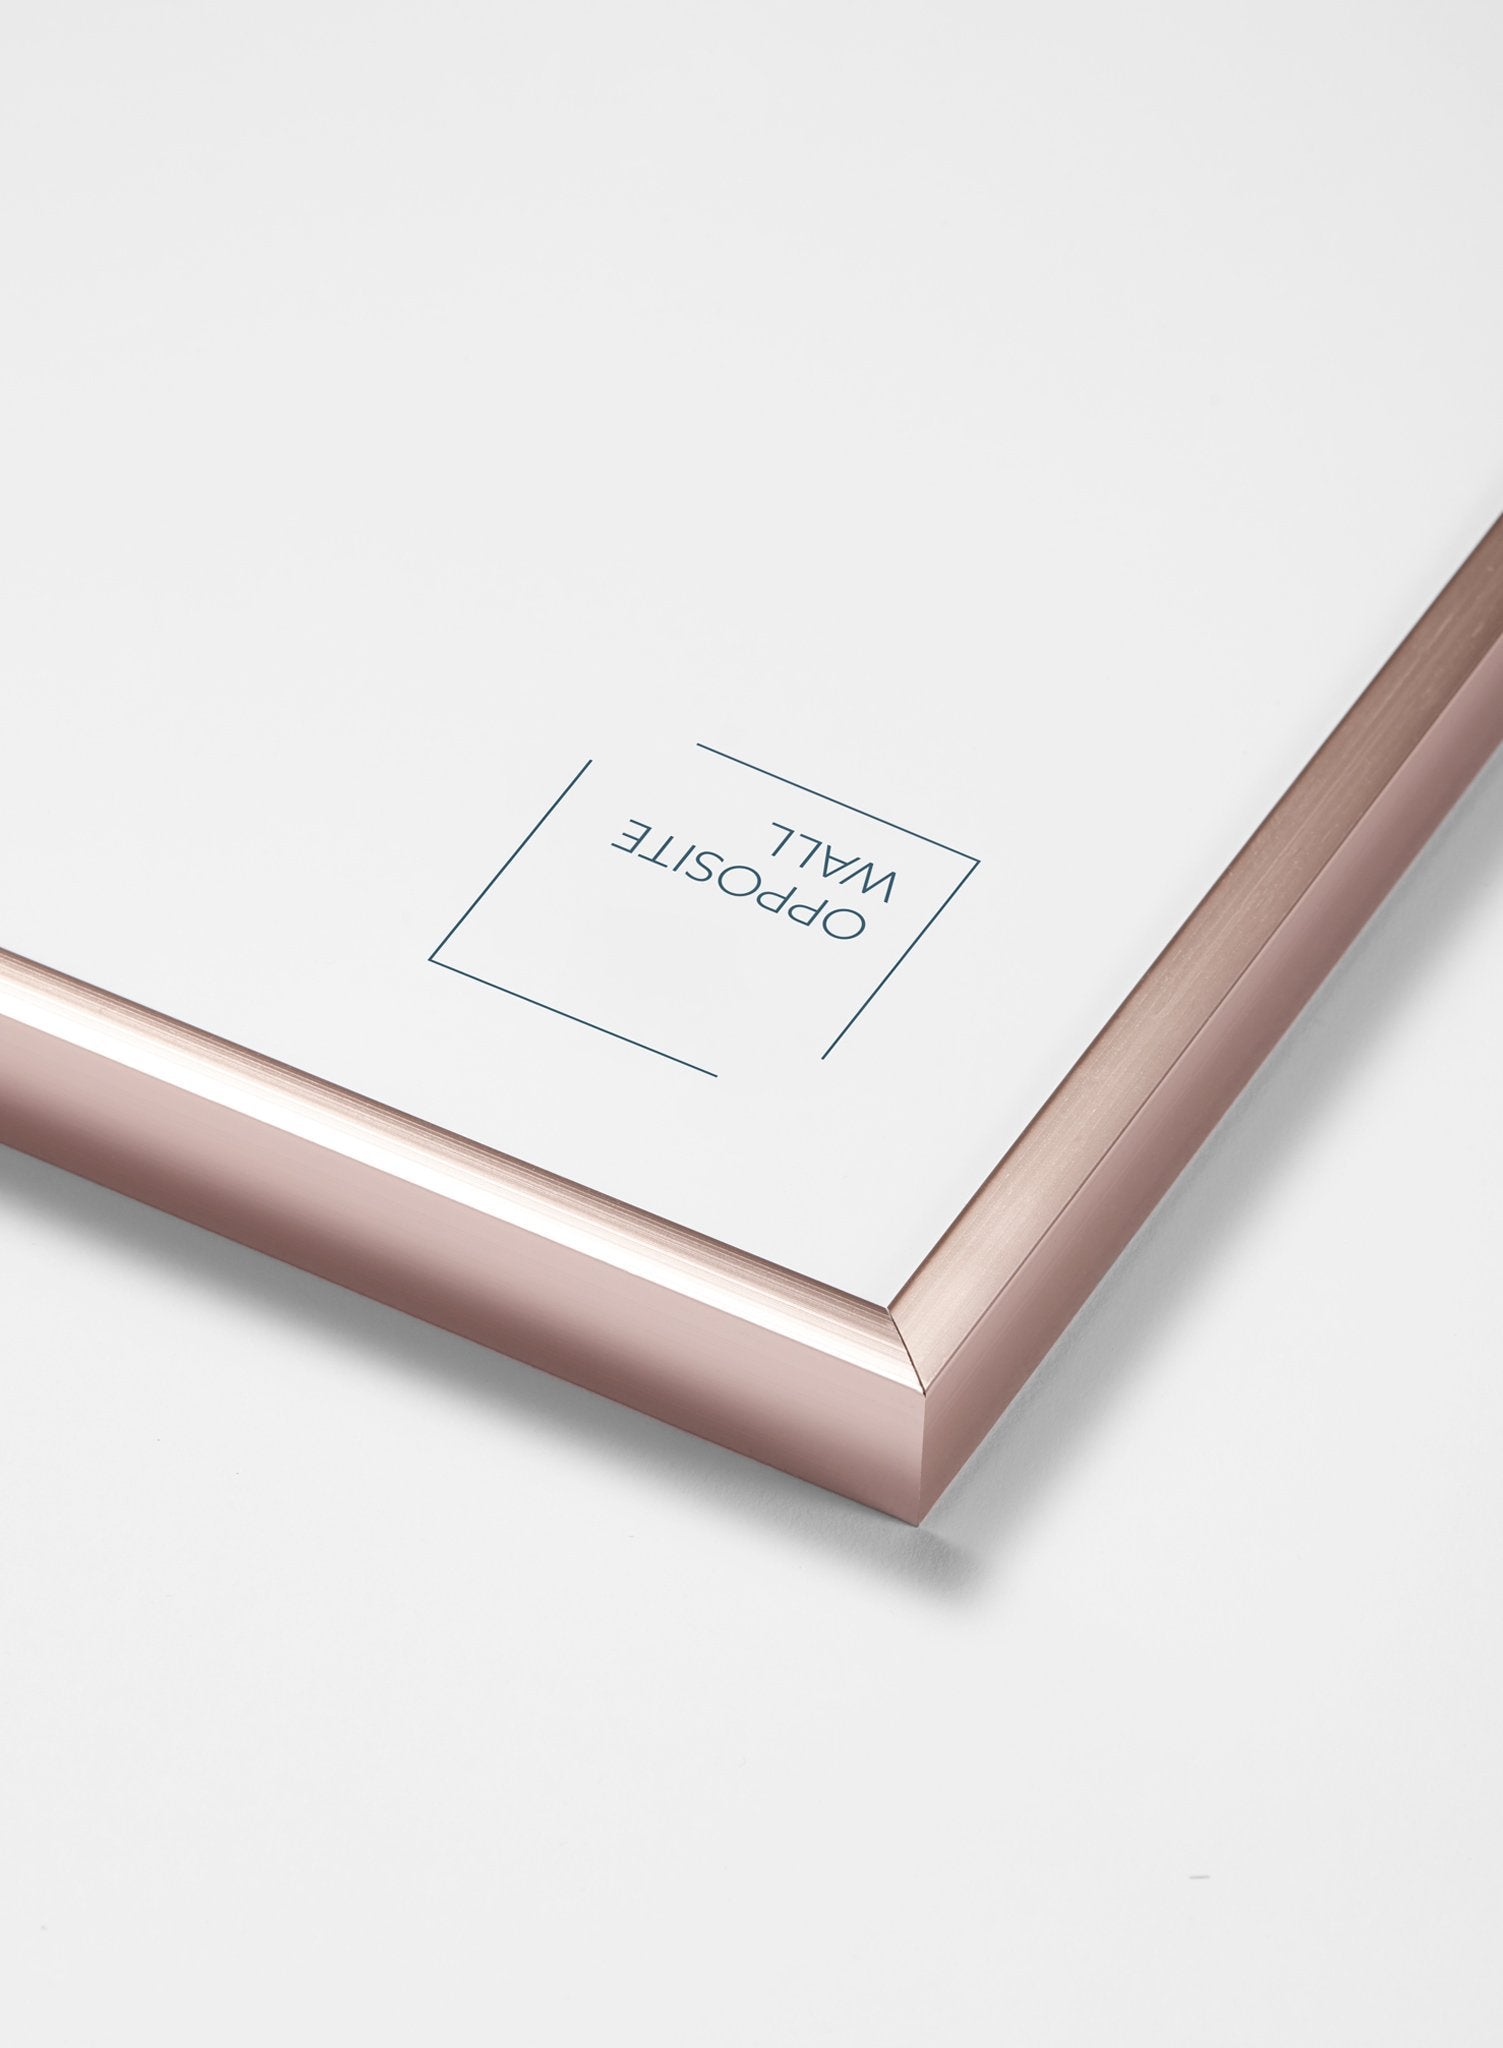 Scandinavian rose gold aluminum metal frame by Opposite Wall - Corner of the frame - Size 5x7 inches